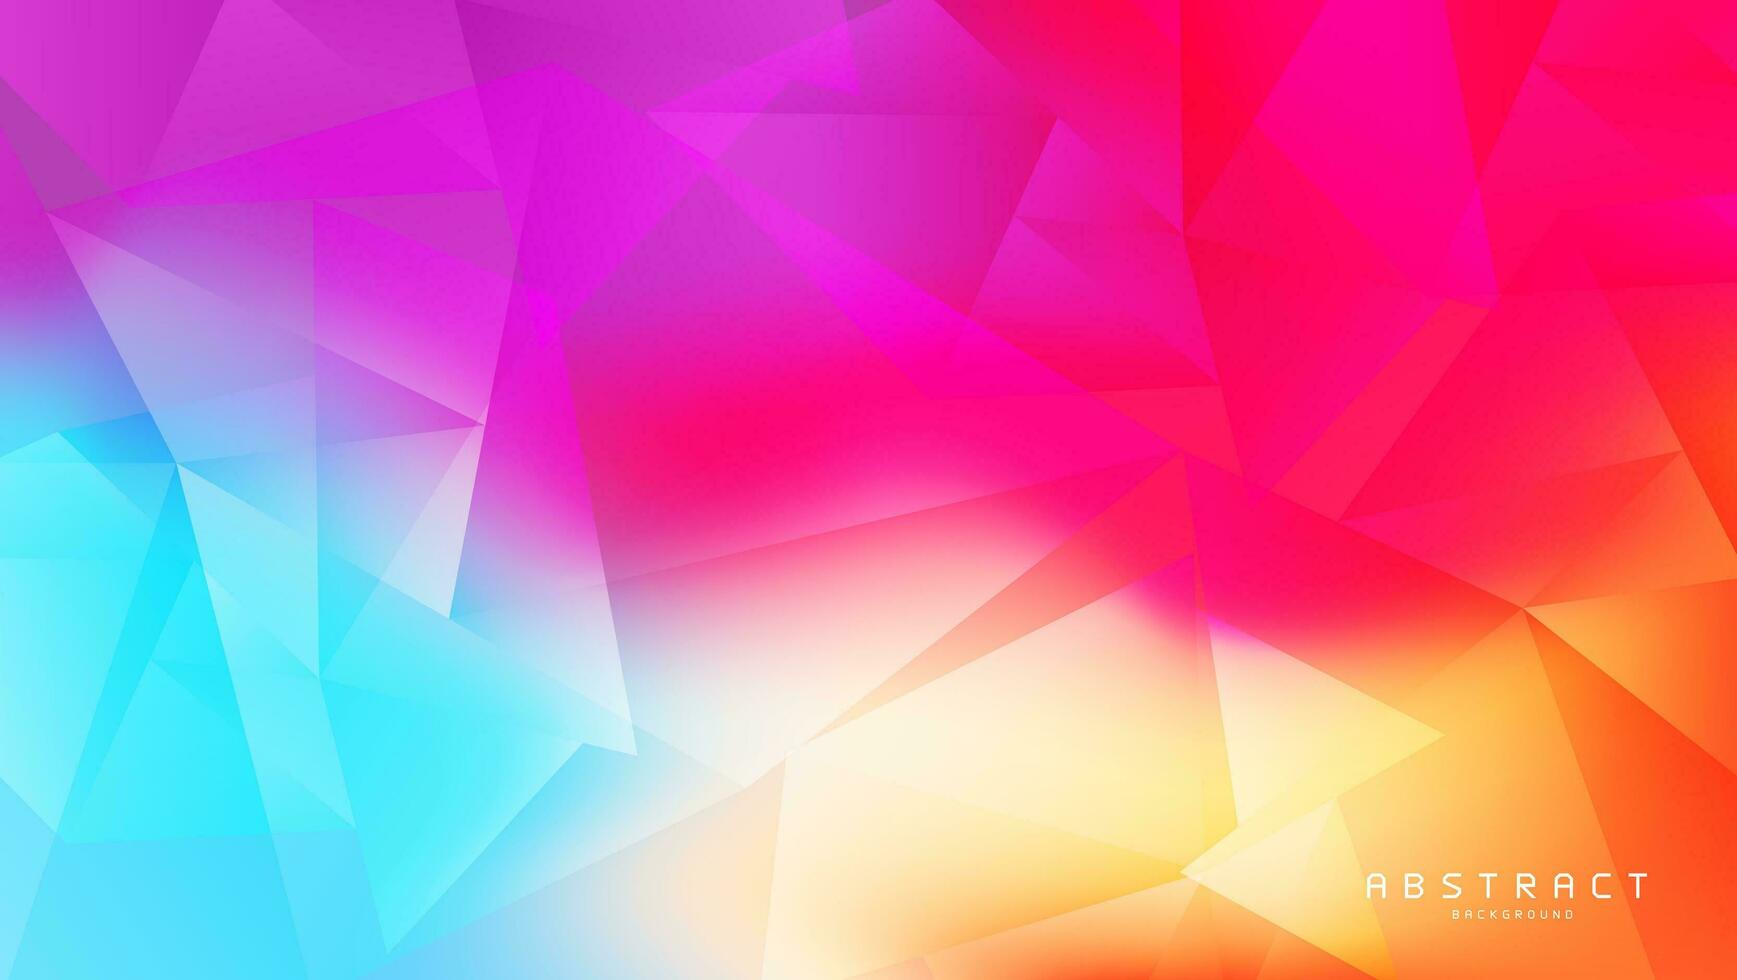 Free vector abstract colorful geometric shape design background.